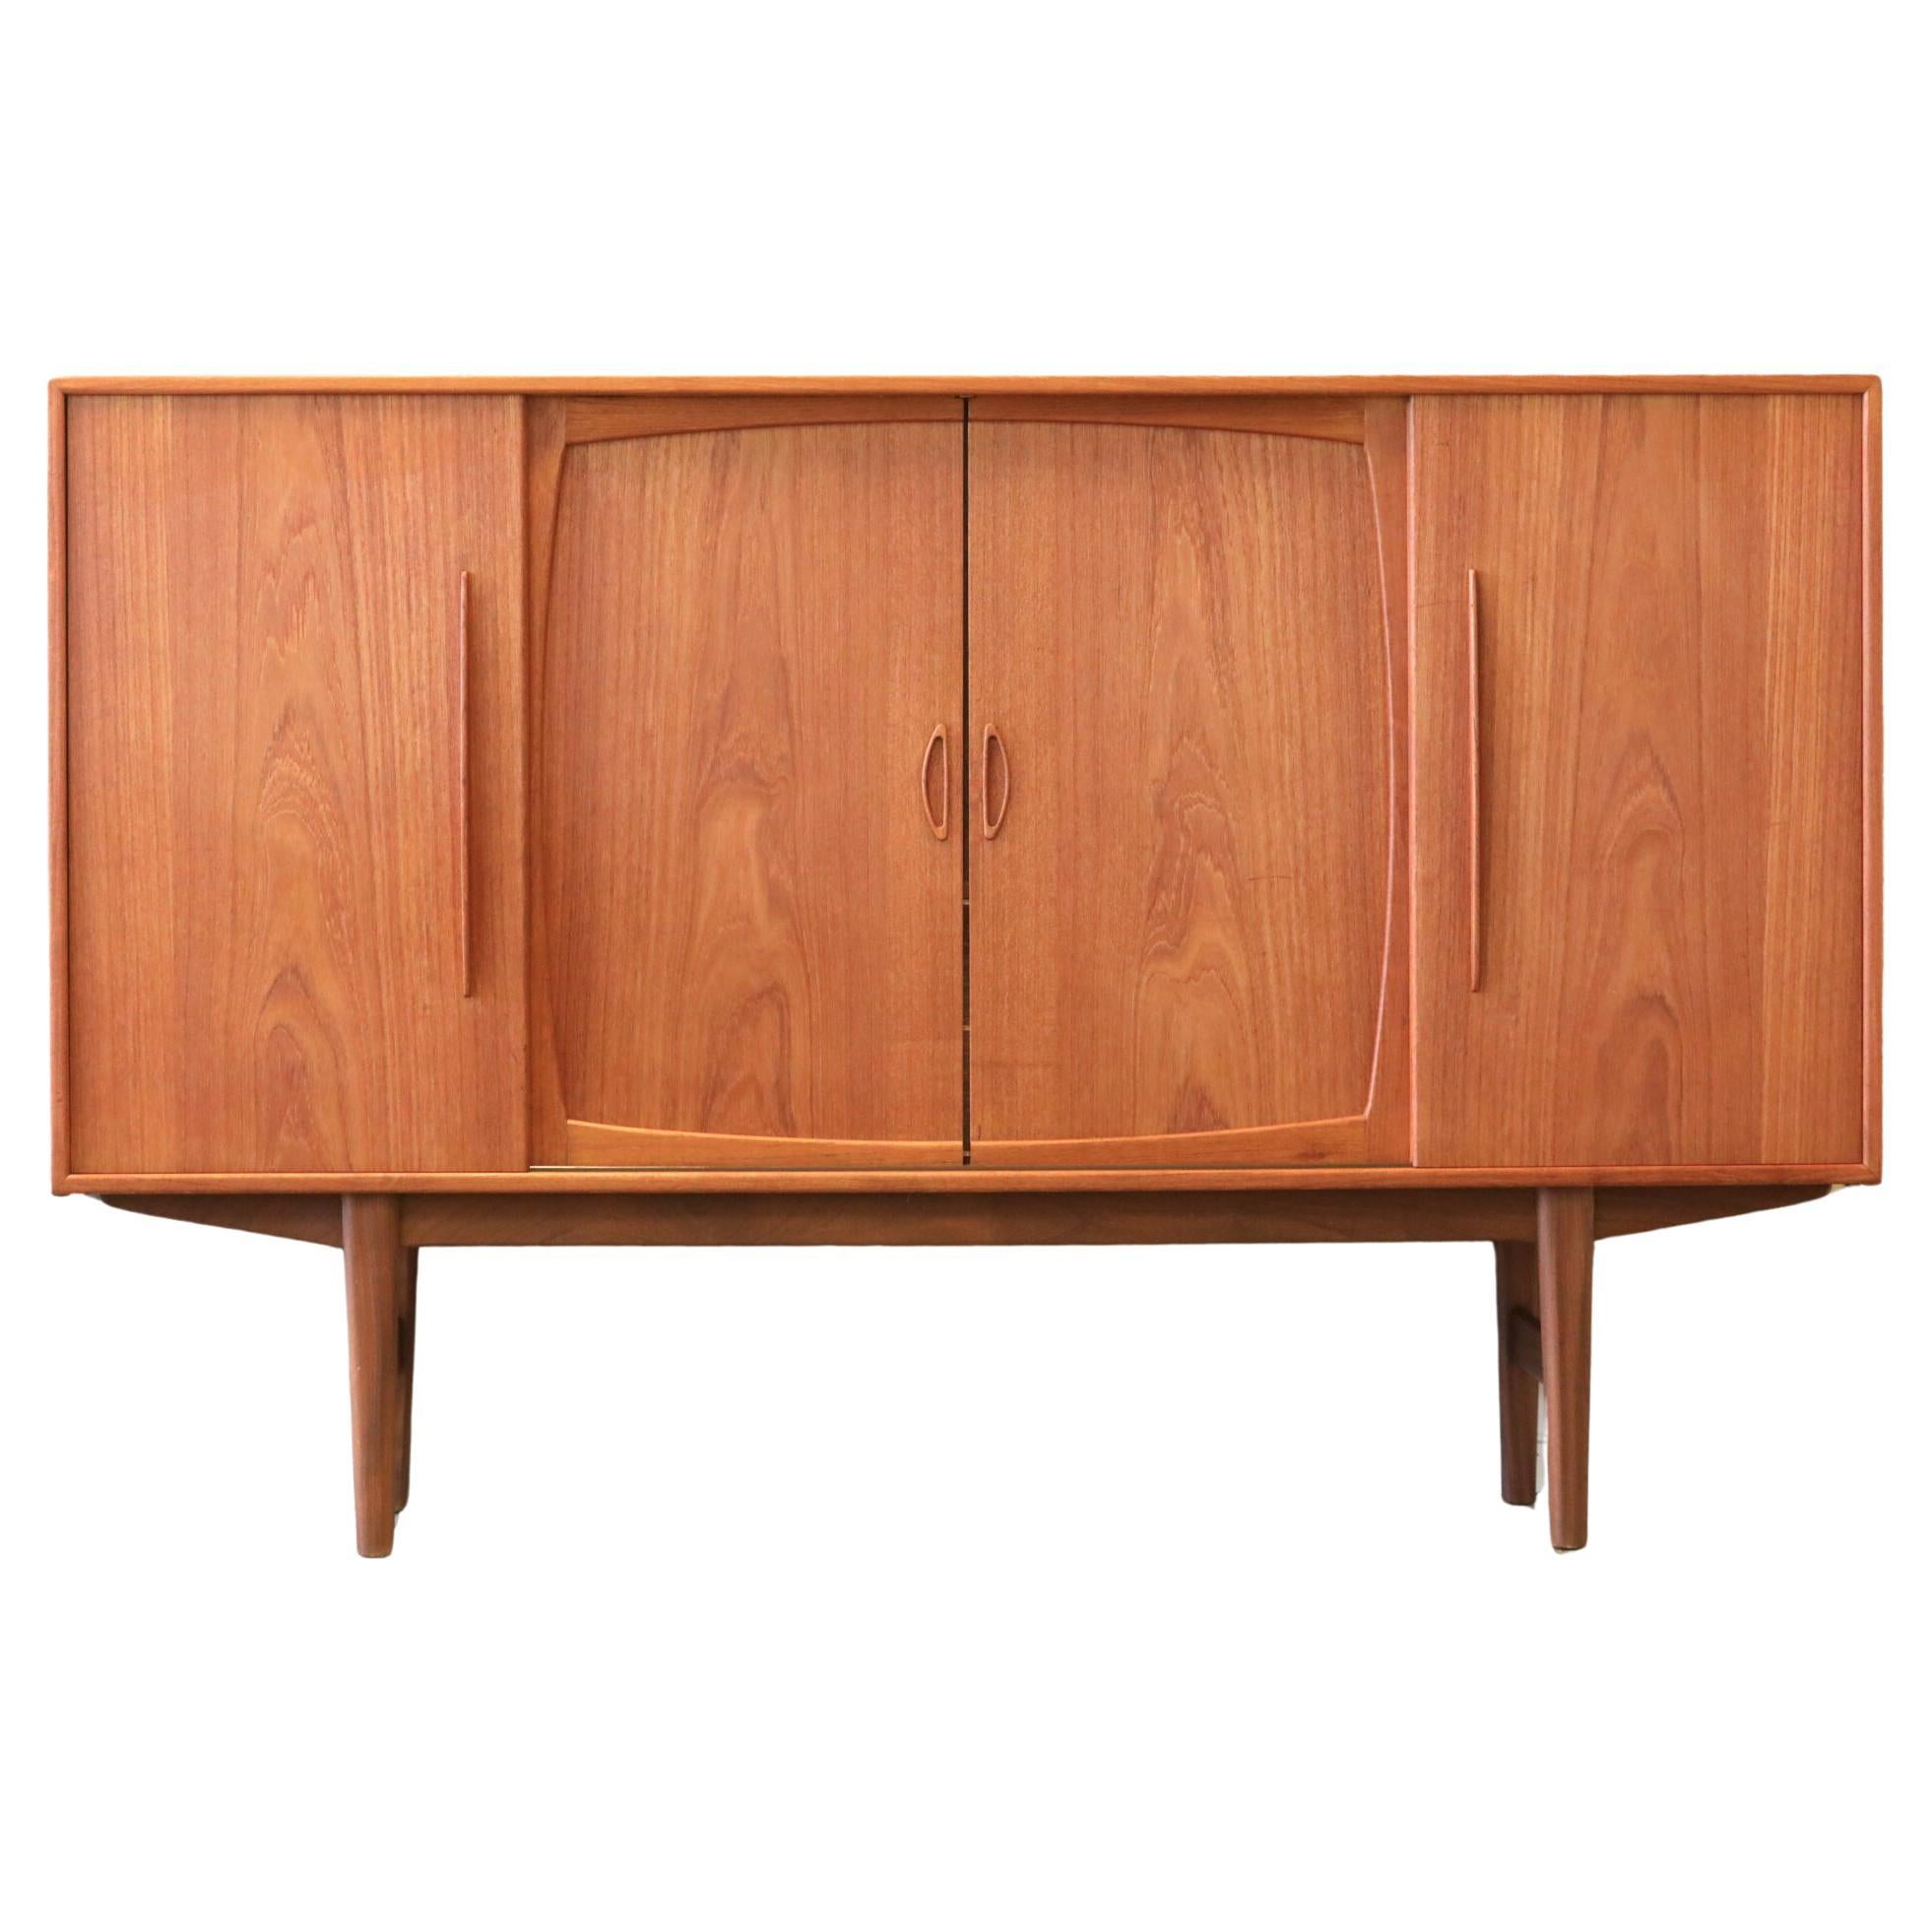 Danish cabinet in teak with sliding doors and bar cabinet